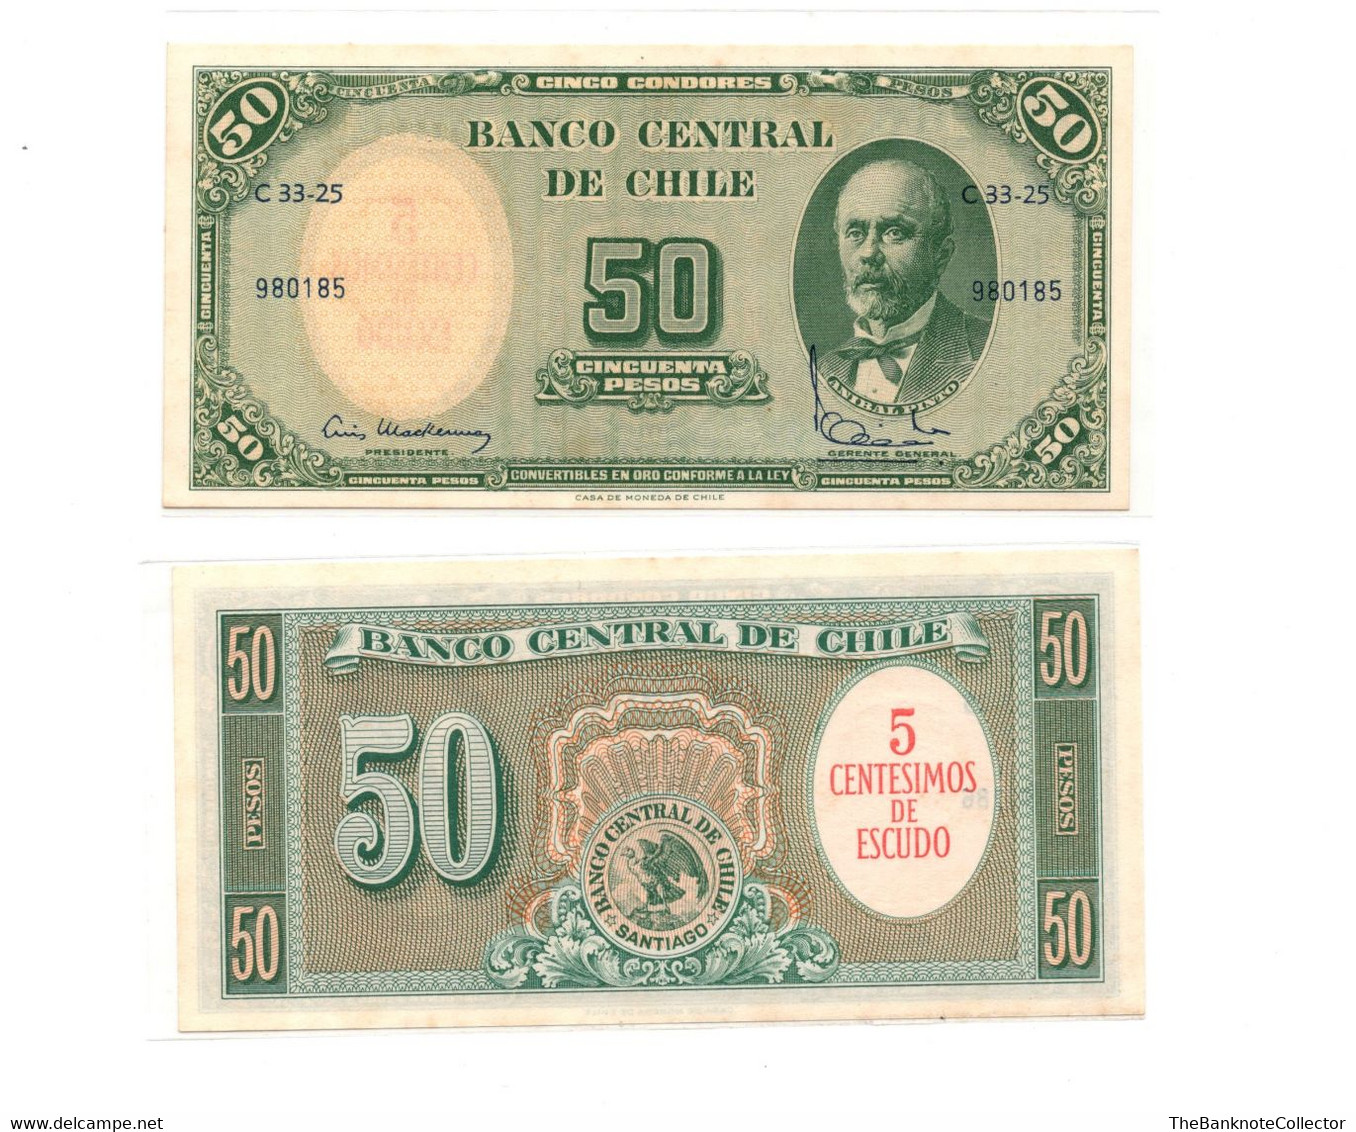 Chile 5 Centimos On 50 Escudos ND 1960 P-126 UNC Foxing - Cile